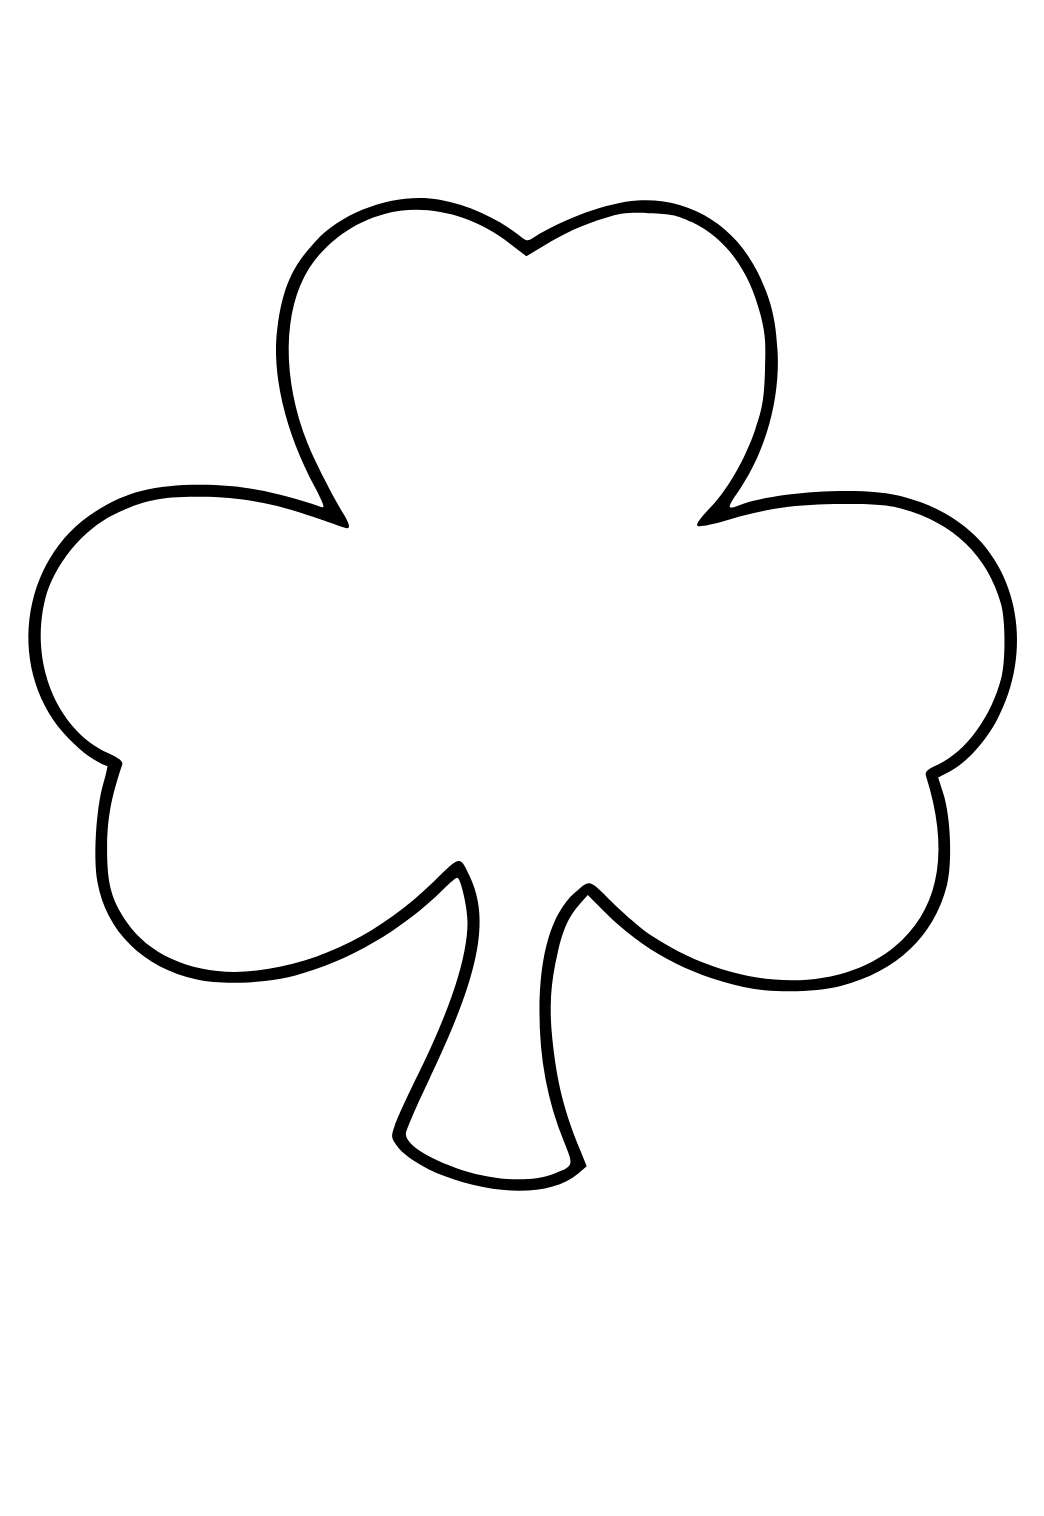 Free printable shamrock easy coloring page for adults and kids